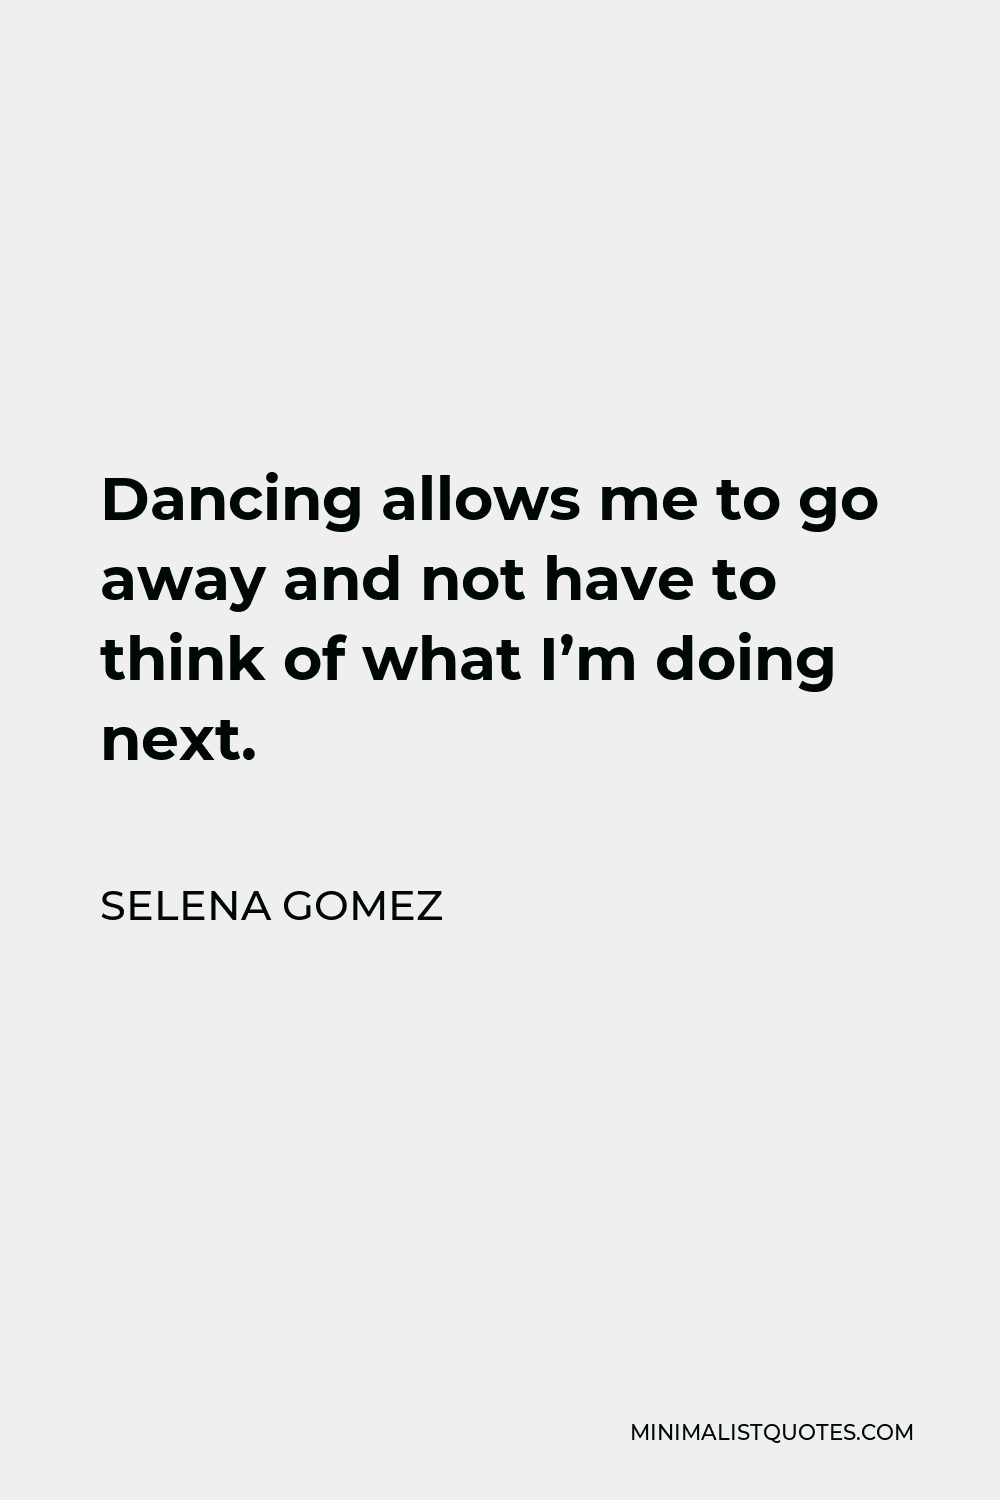 Selena Gomez Quote - Dancing allows me to go away and not have to think of what I’m doing next.